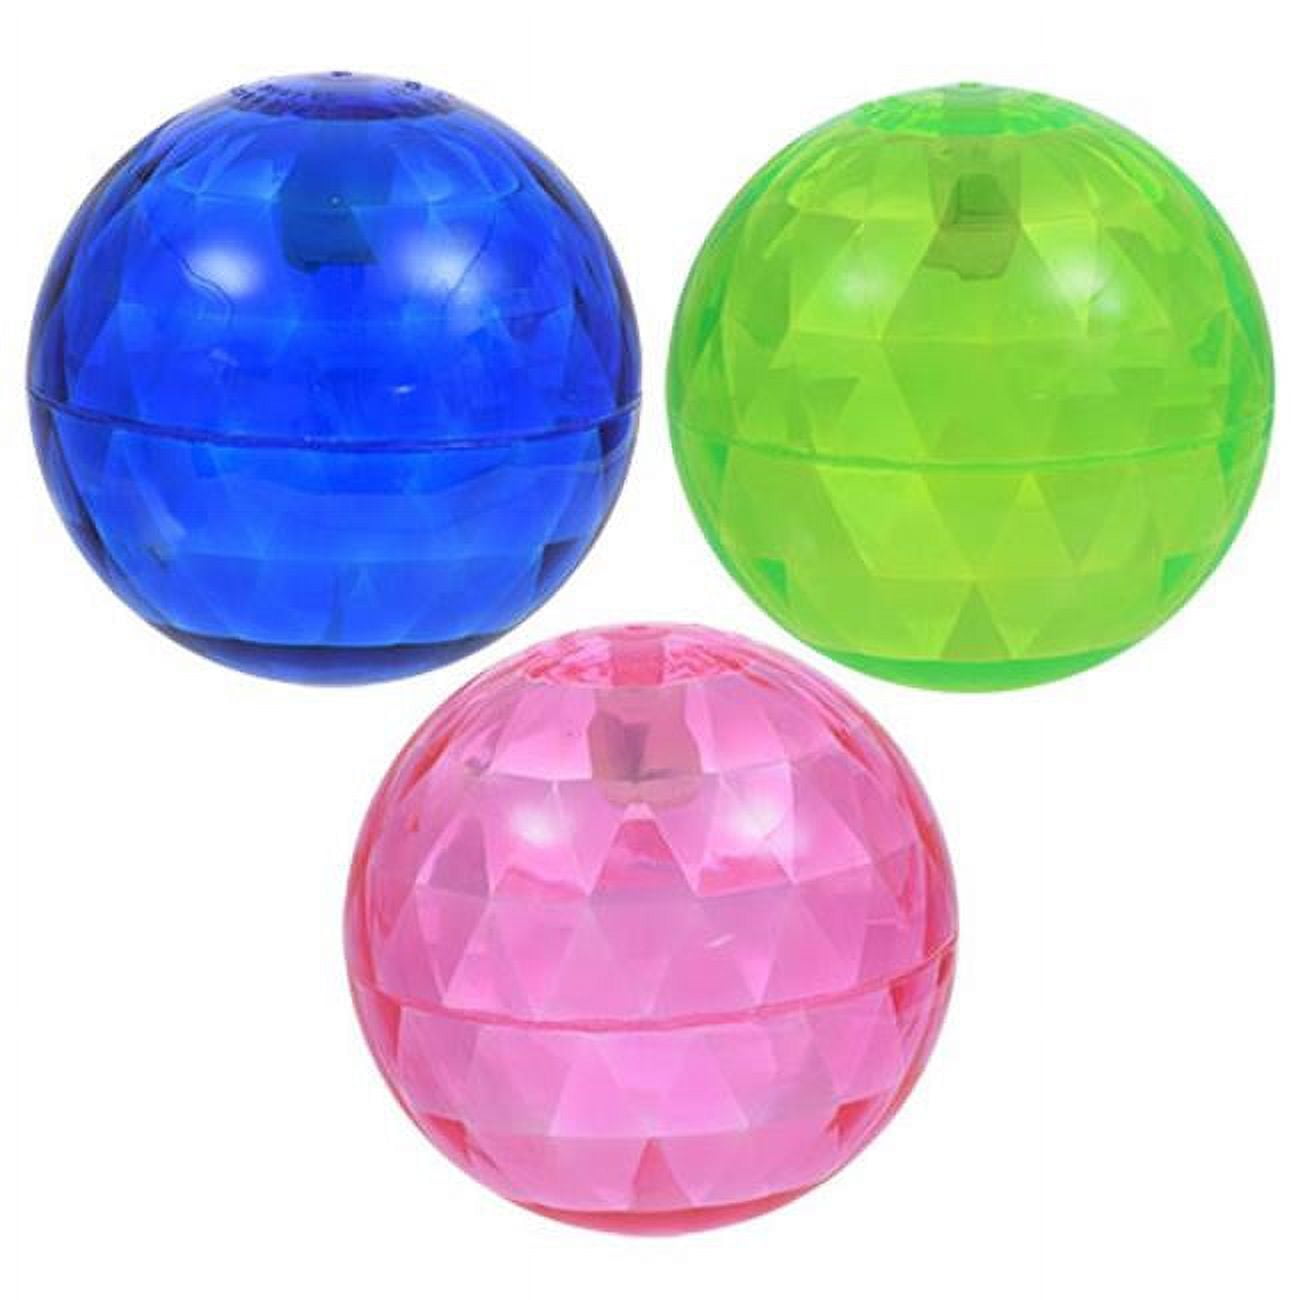 Picture of Blinkee 670070 4 in. LED Super Bounce Ball, Assorted Color